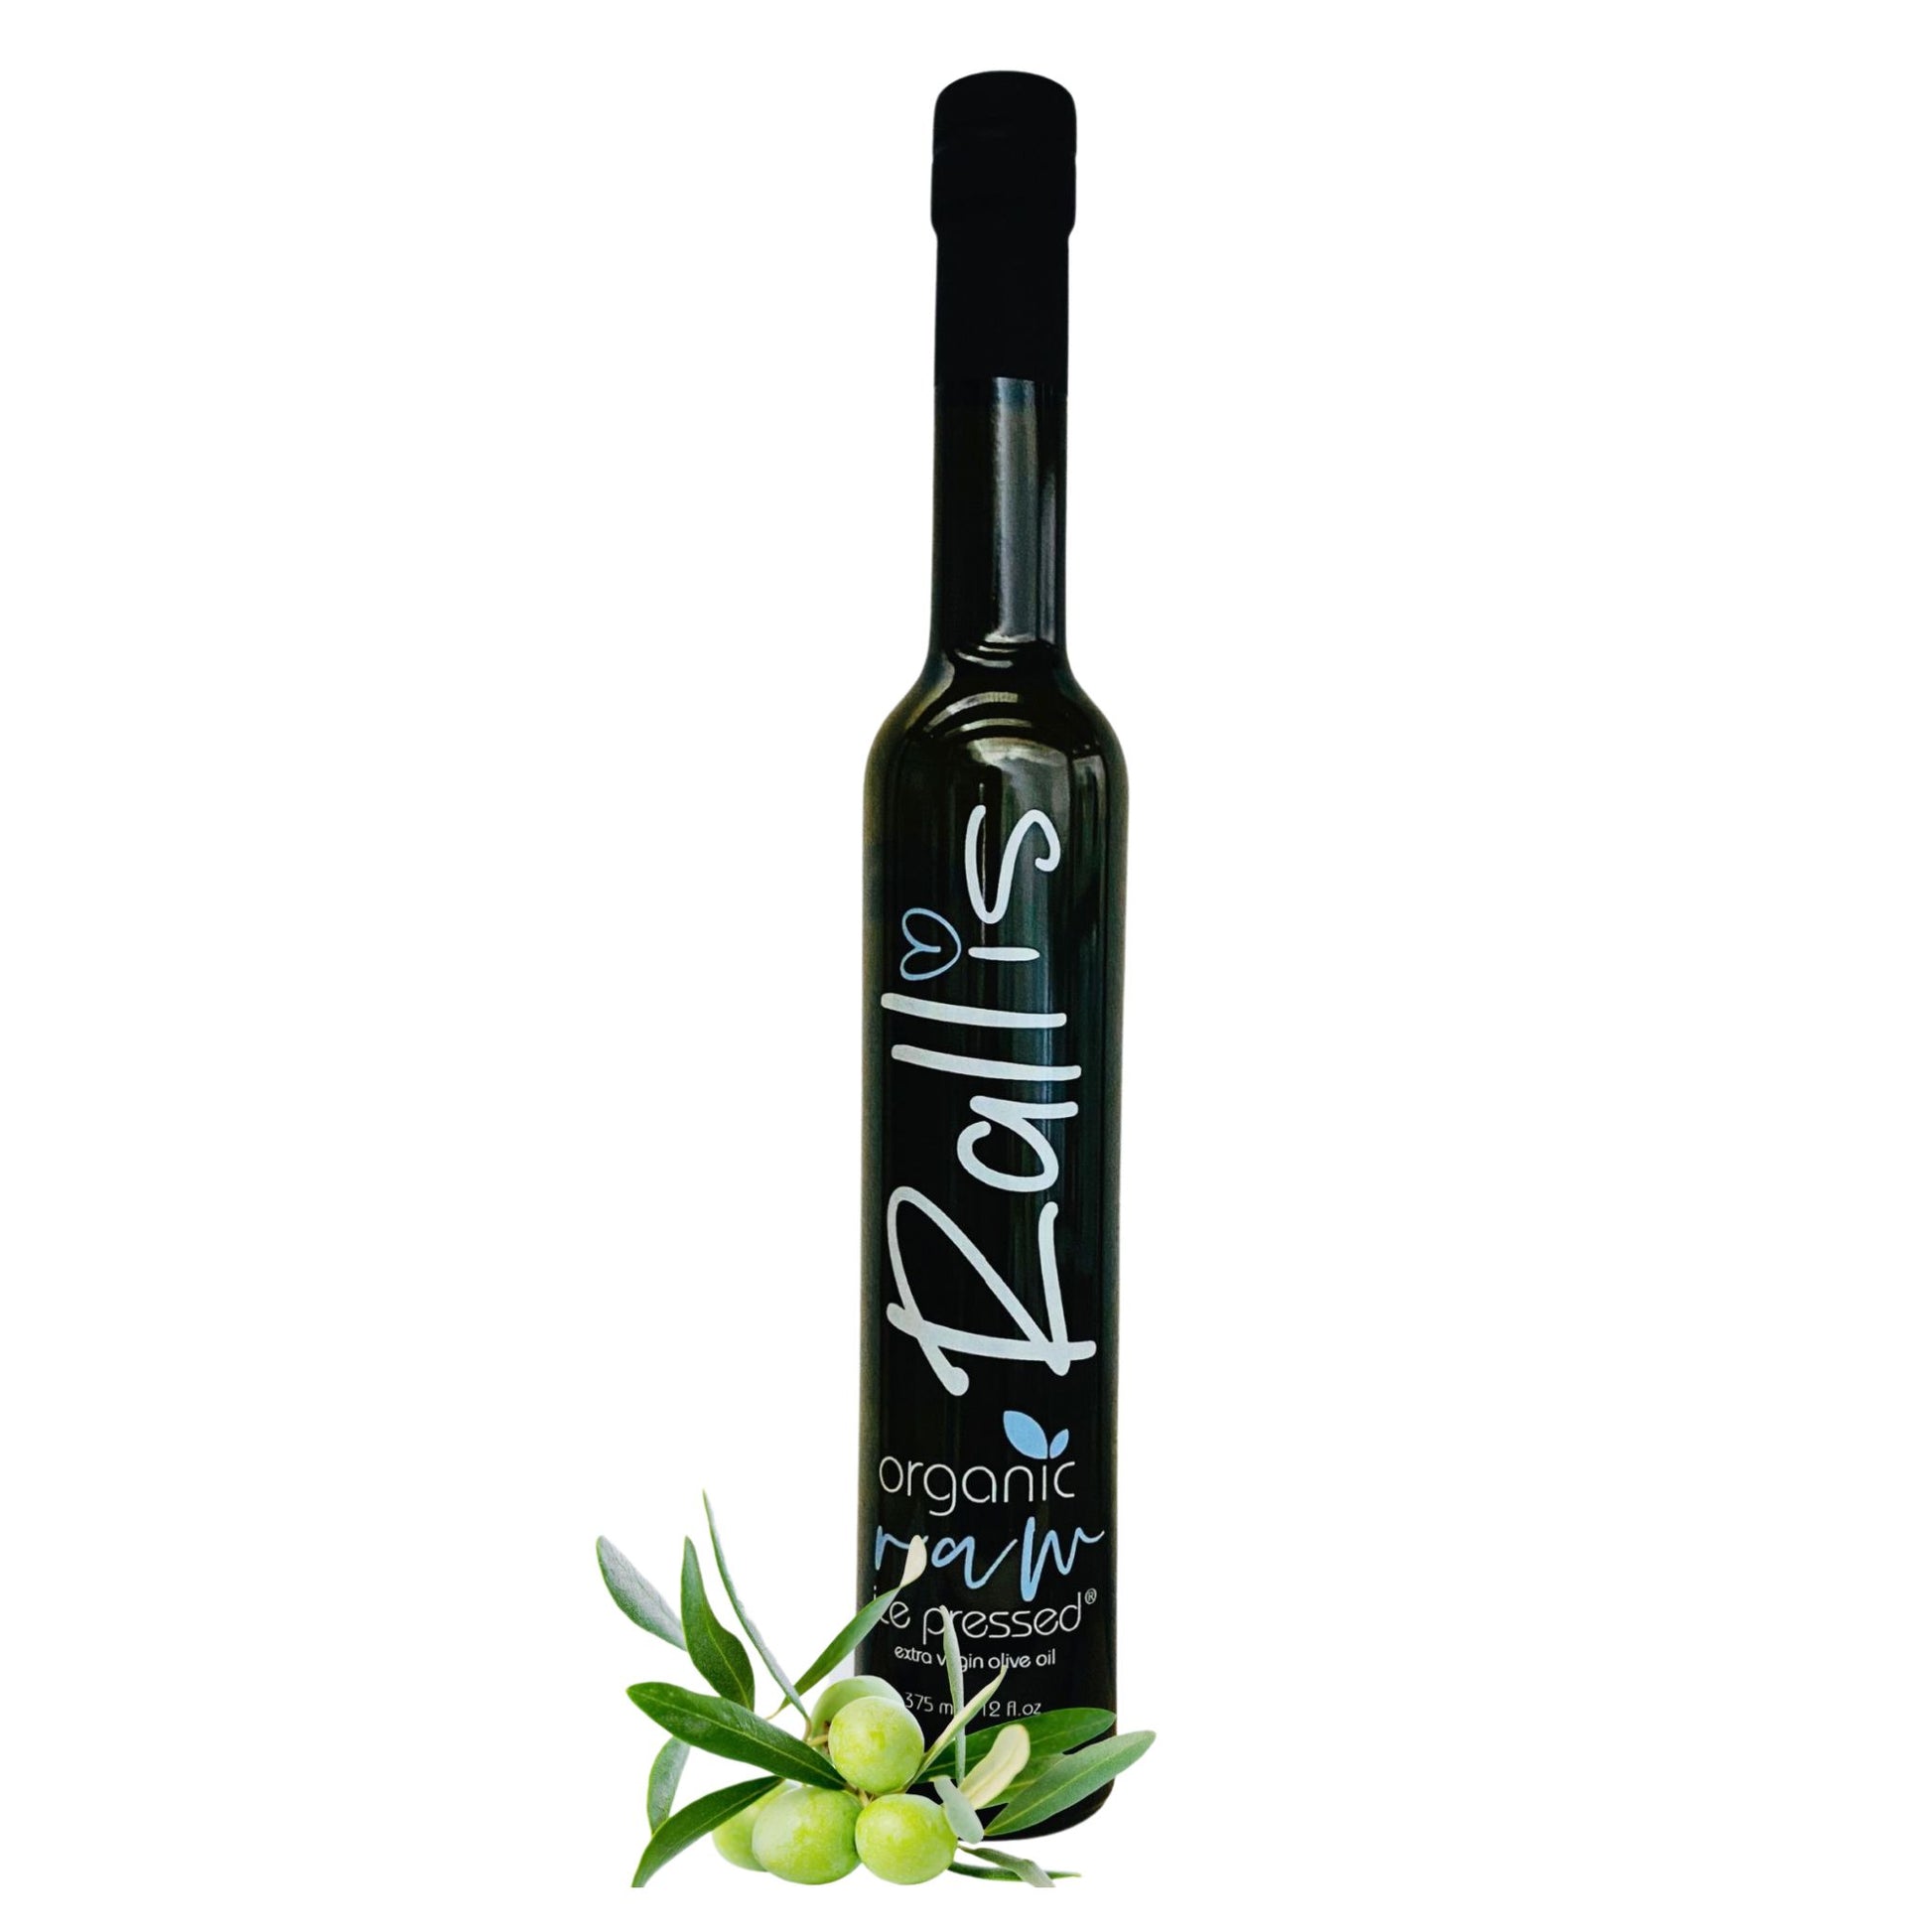 Rallis High Polyphenol Ice Pressed® Olive Oil - Premium Greek Olive Oil Bottle with Health Benefits and Freshness